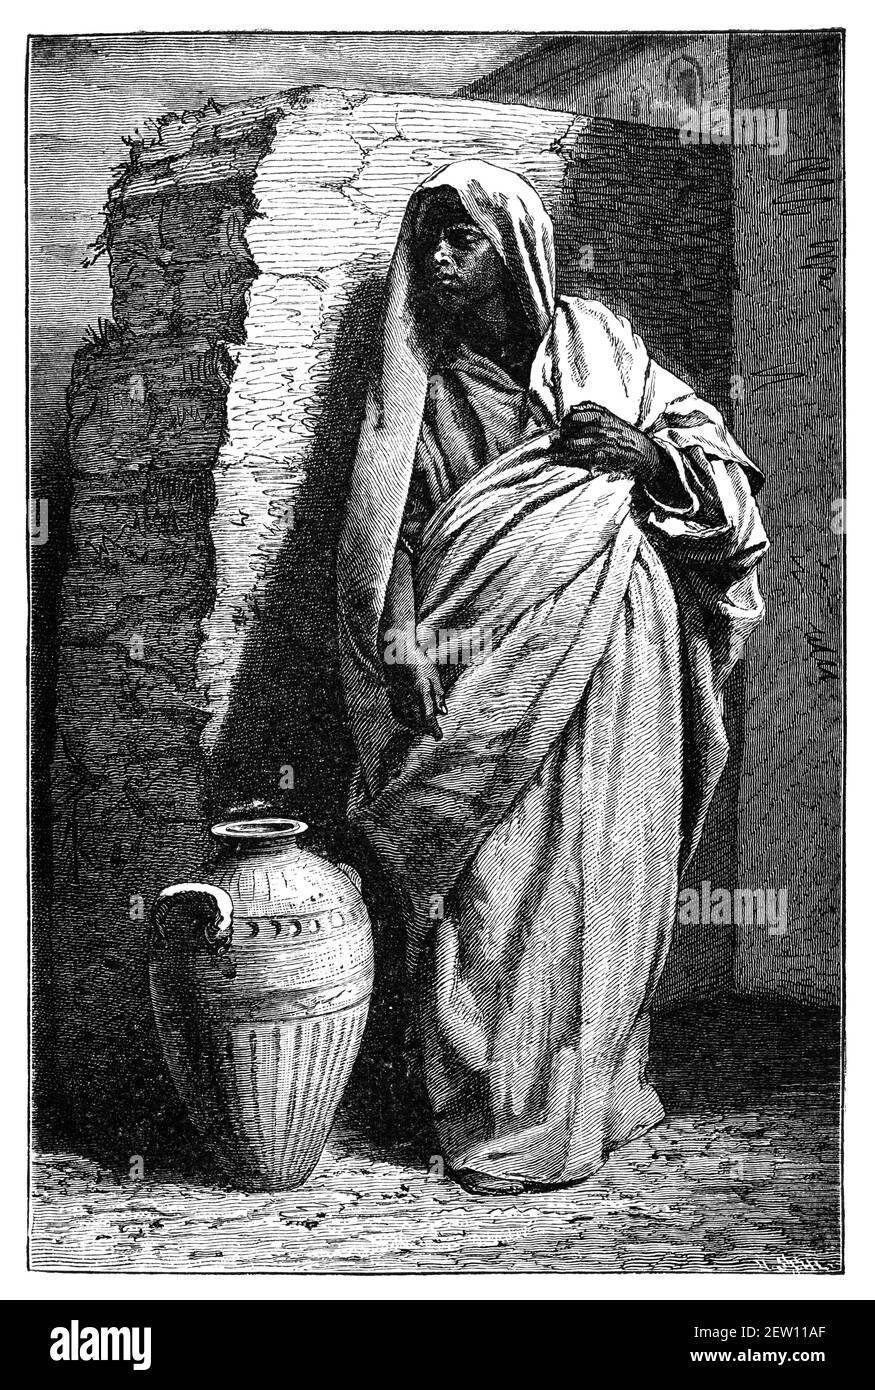 Berber woman. Culture and history of North Africa. Vintage antique black and white illustration. 19th century. Stock Photo